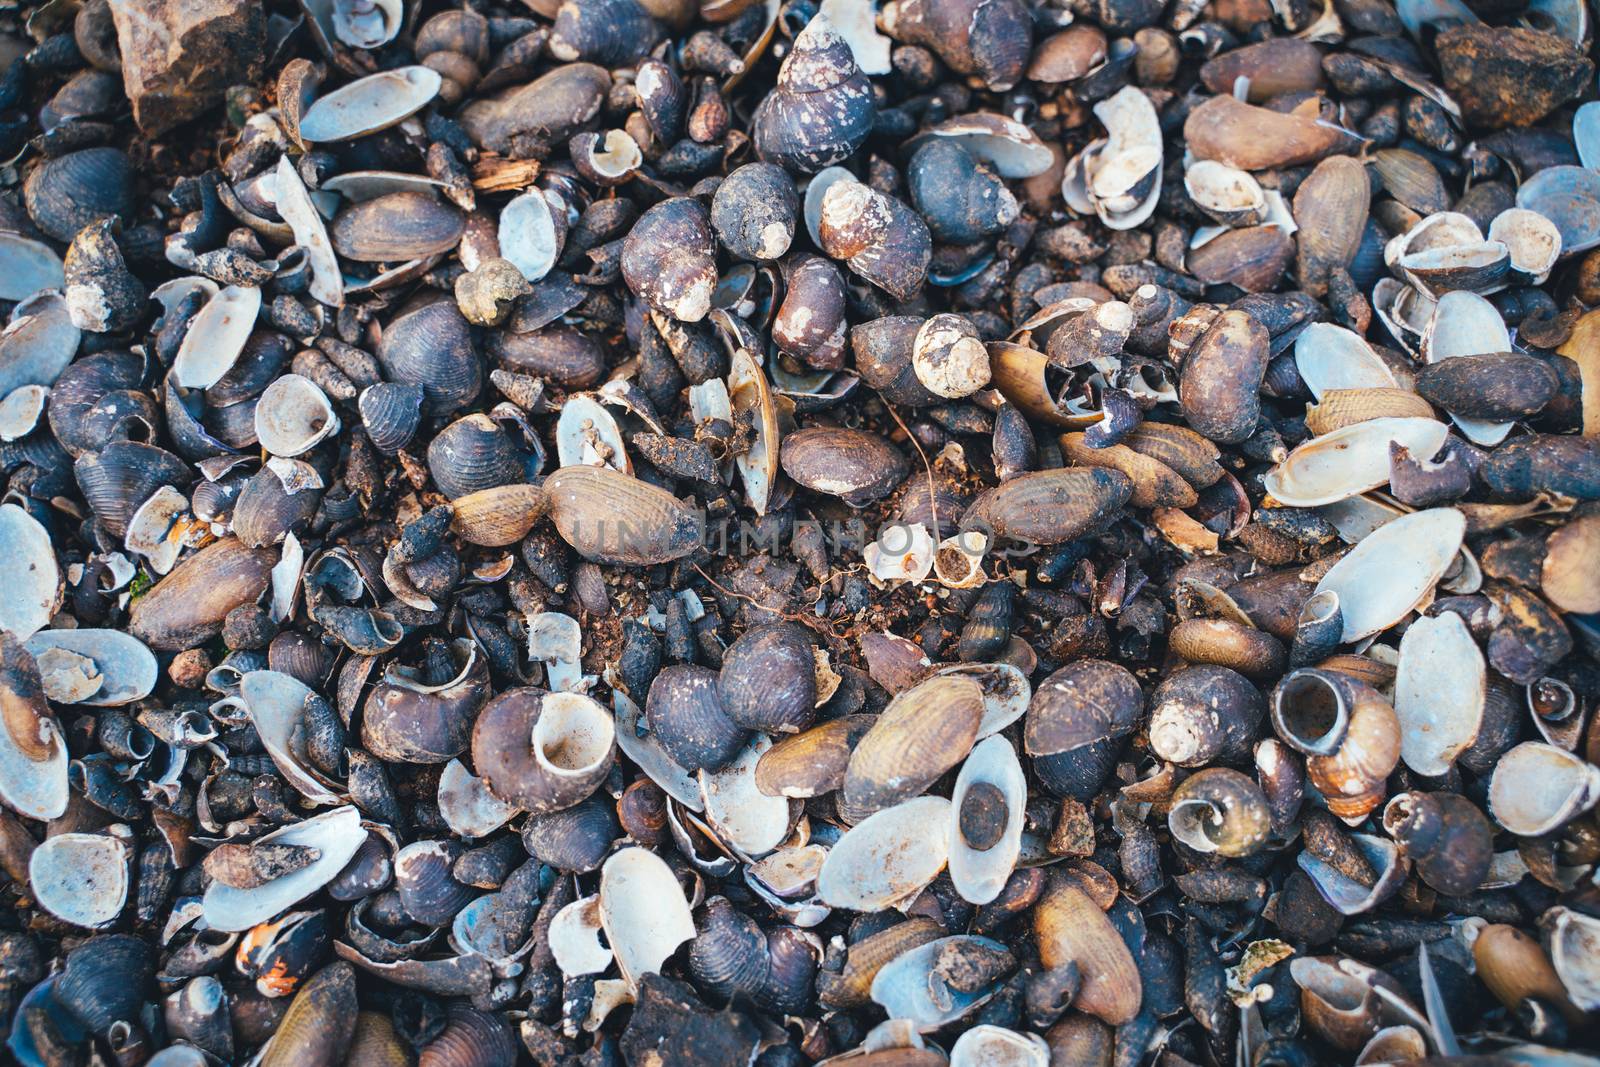 The Background of coral reefs and shells on the beach